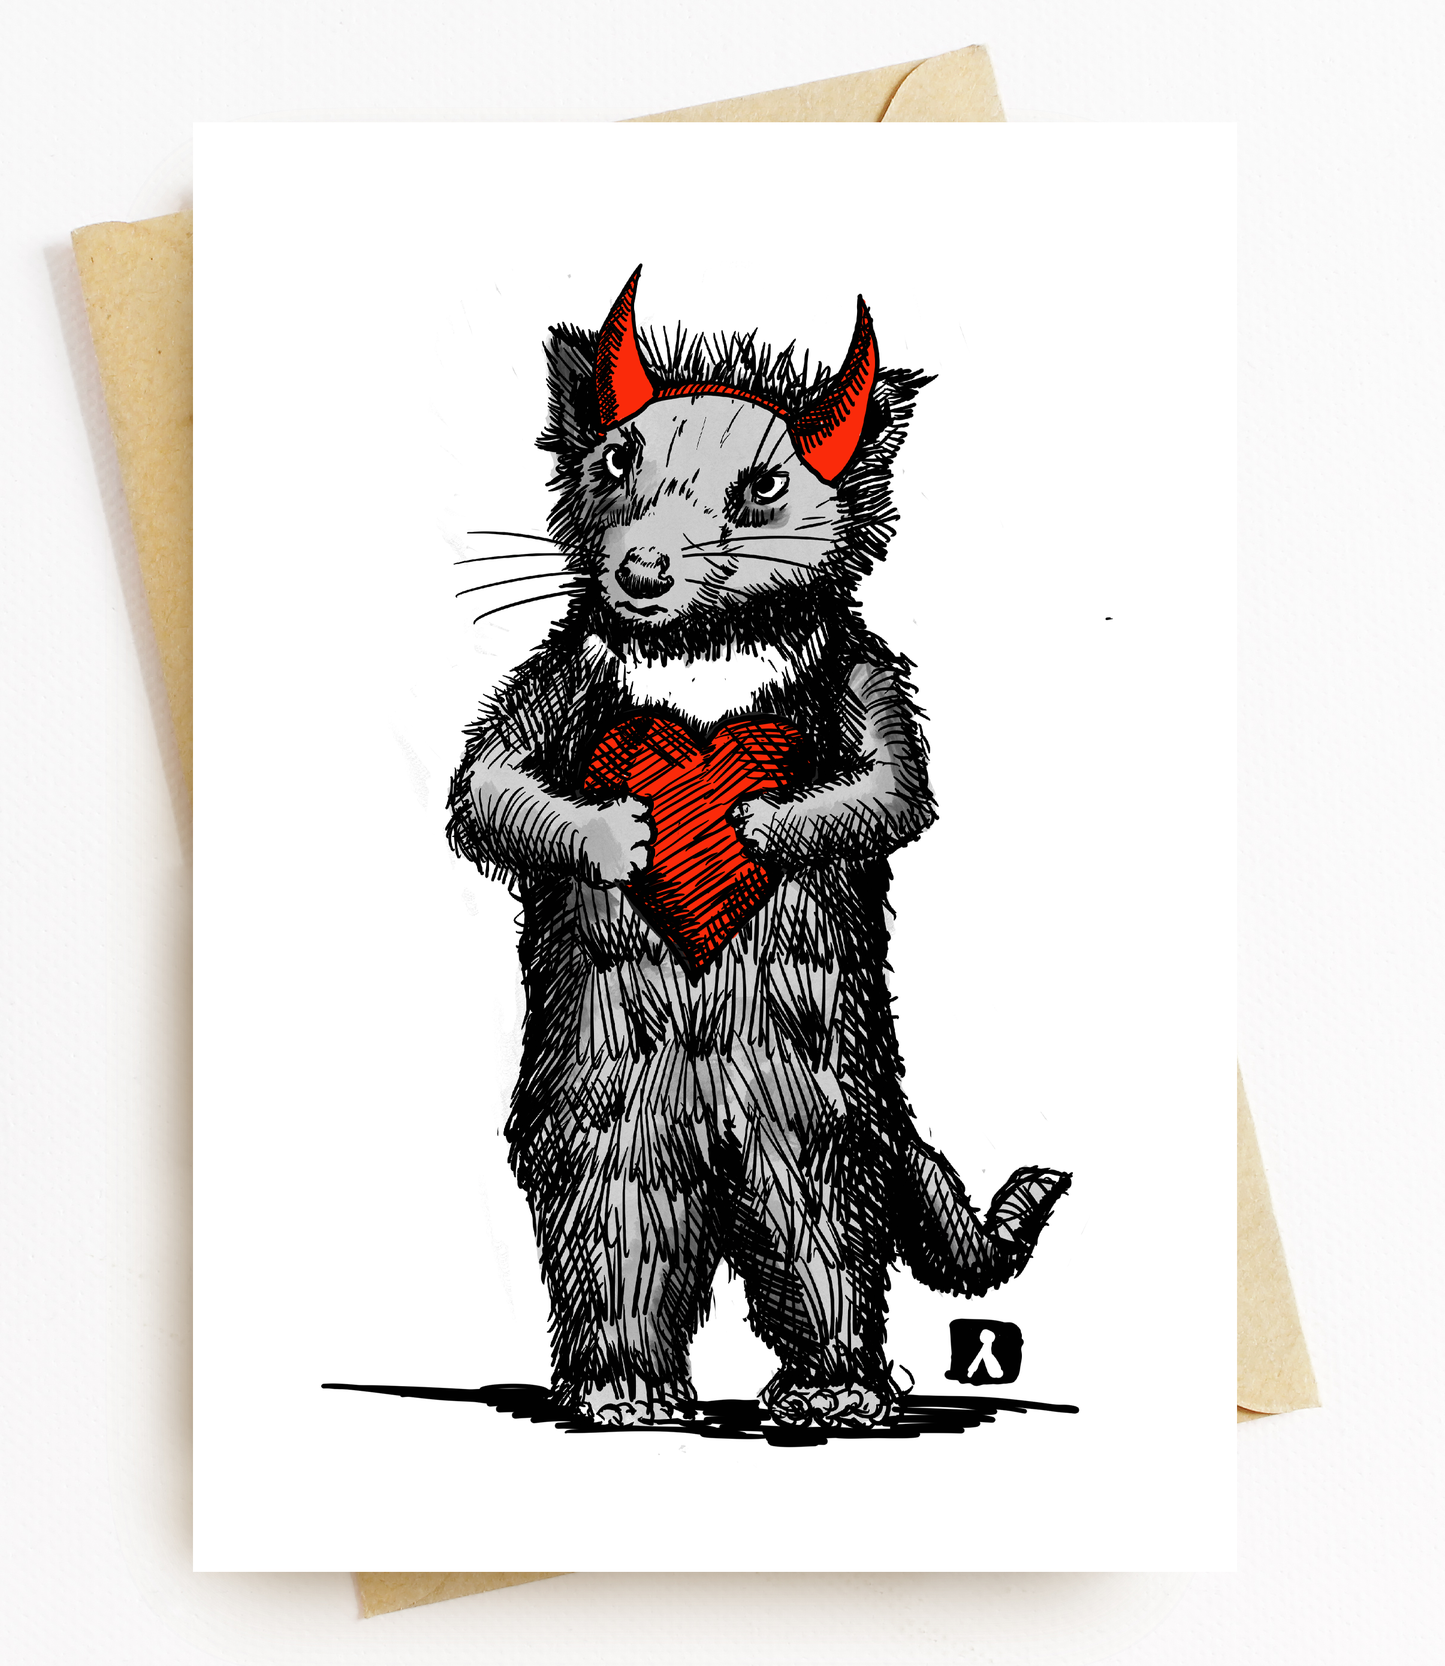 BellavanceInk: Hand Drawn Valentines Day Cards Tasmanian Devil With Heart And Devil Horns Pen & Ink Watercolor Illustration 5 x 7 Inches